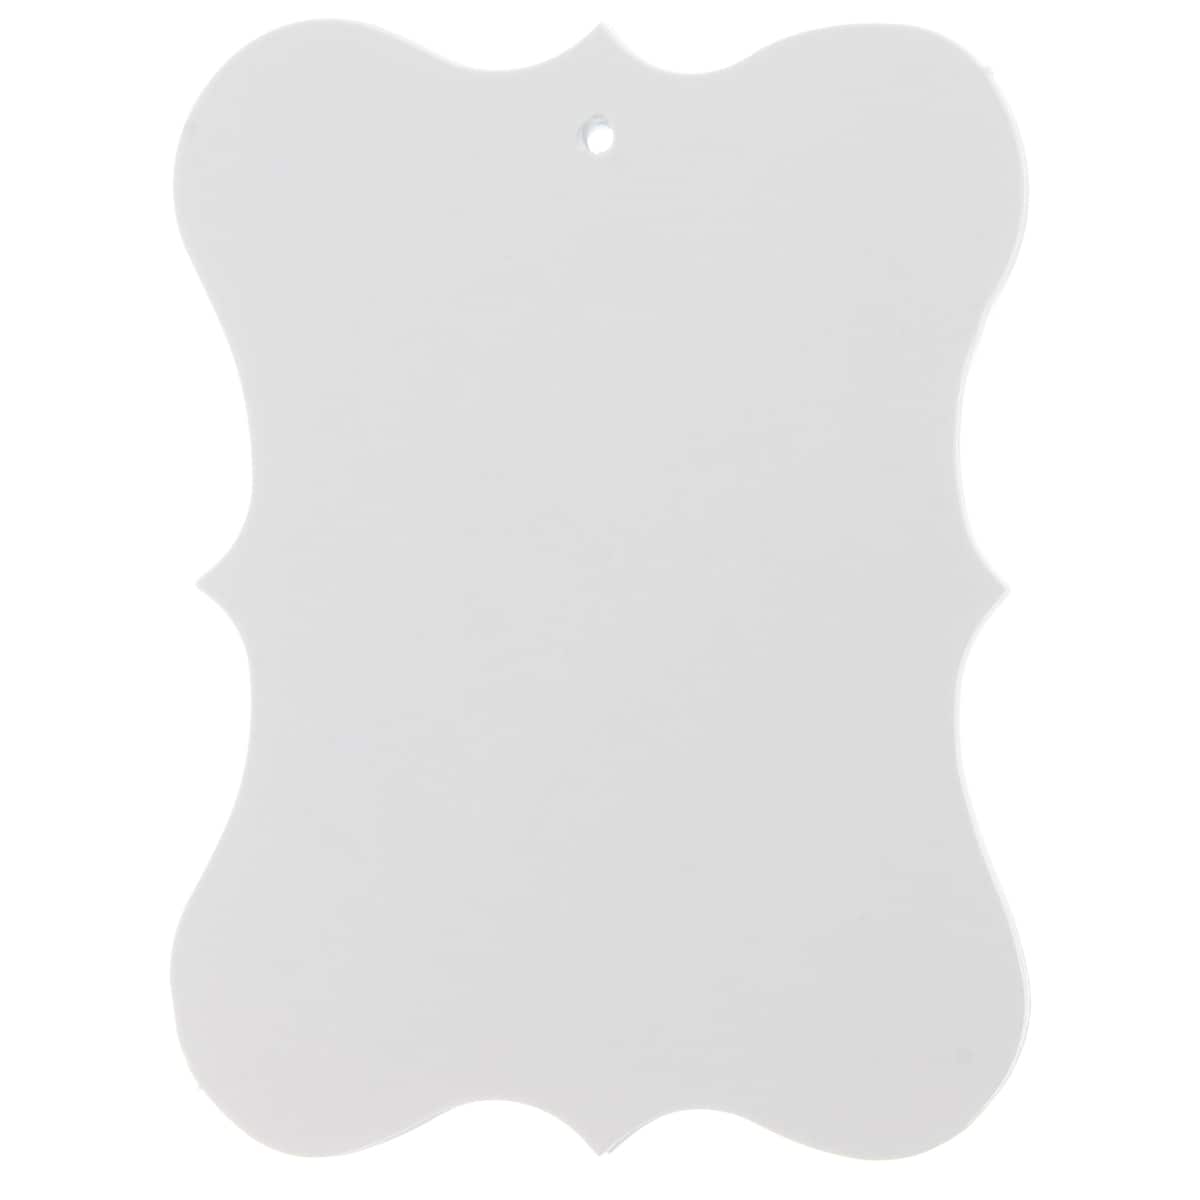 12 Packs: 20 Ct. (240 Total) Medium White Tags by Recollections, Size: 2.1” x 4.25”